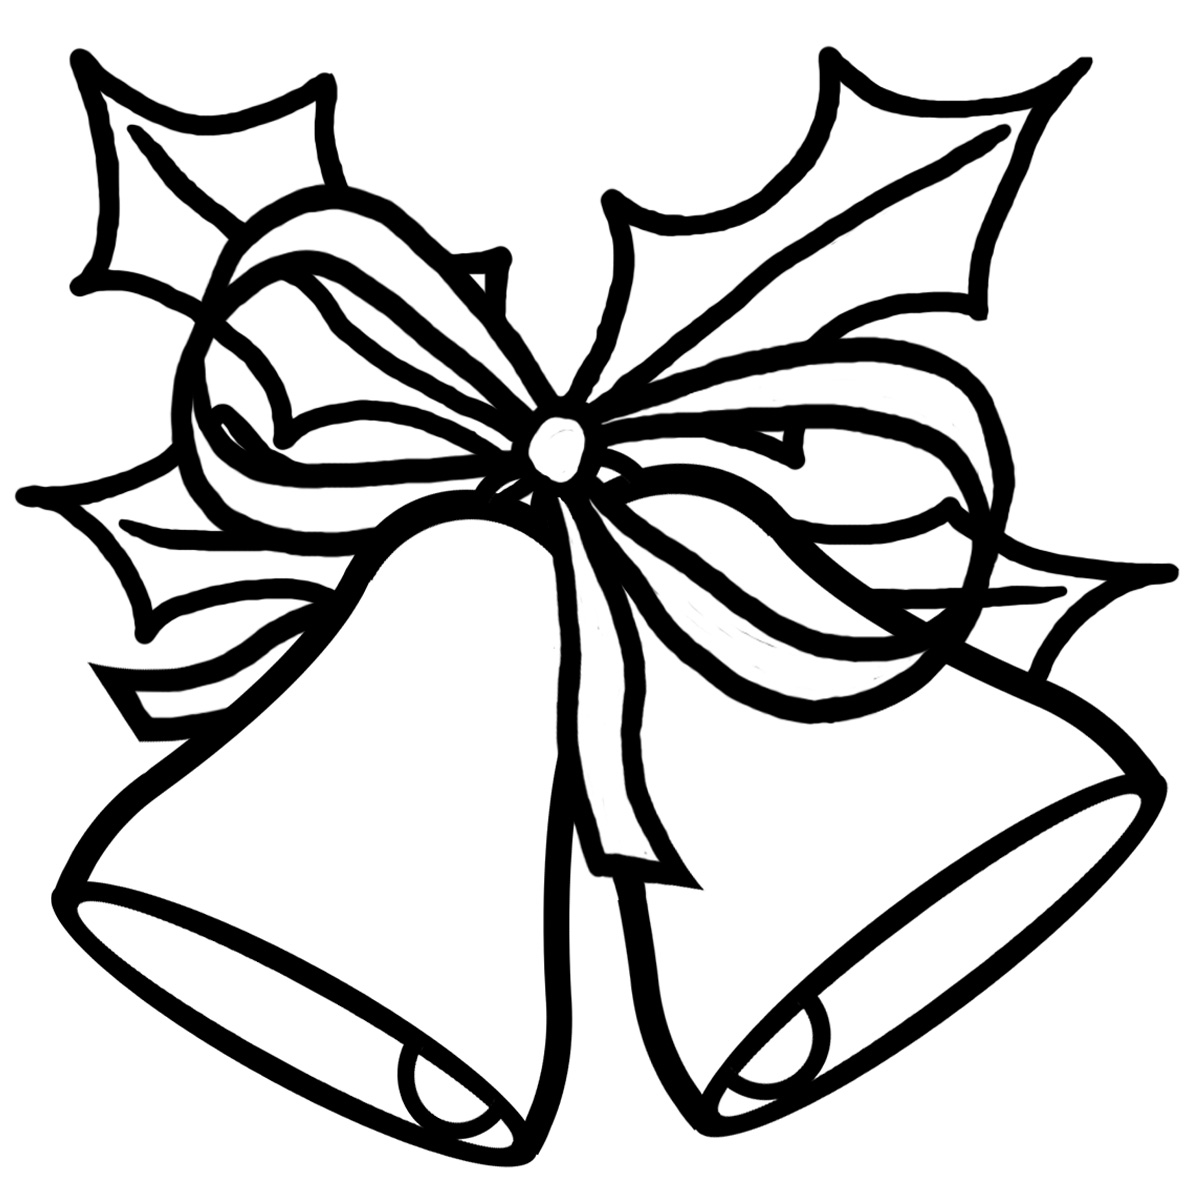 Gift Bag Clipart Black And White | Clipart Panda - Free Clipart Images